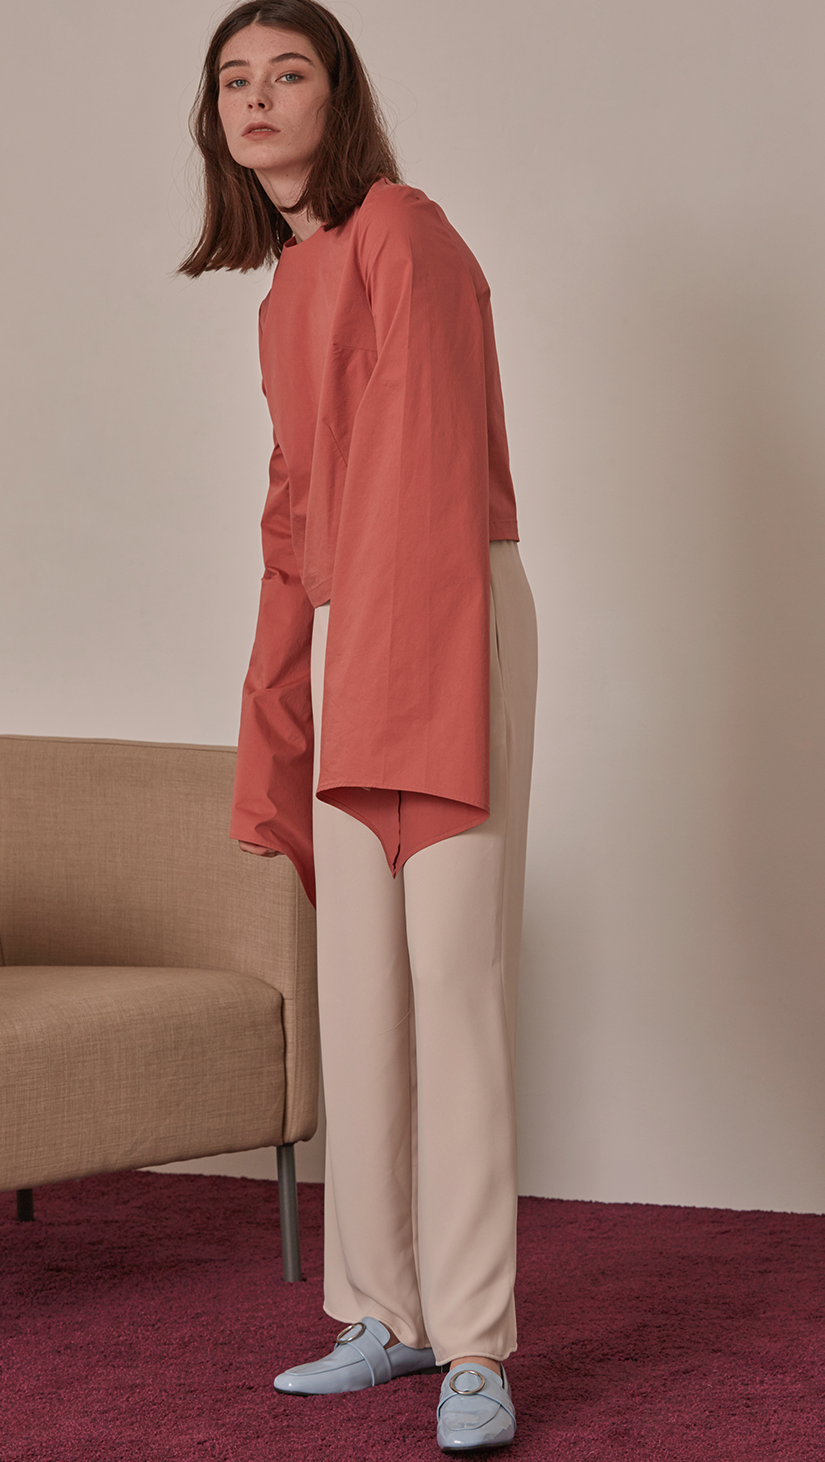 Exaggerated feminine gathered long sleeves. Bell sleeves cuffs. Concealed zip opening at back.